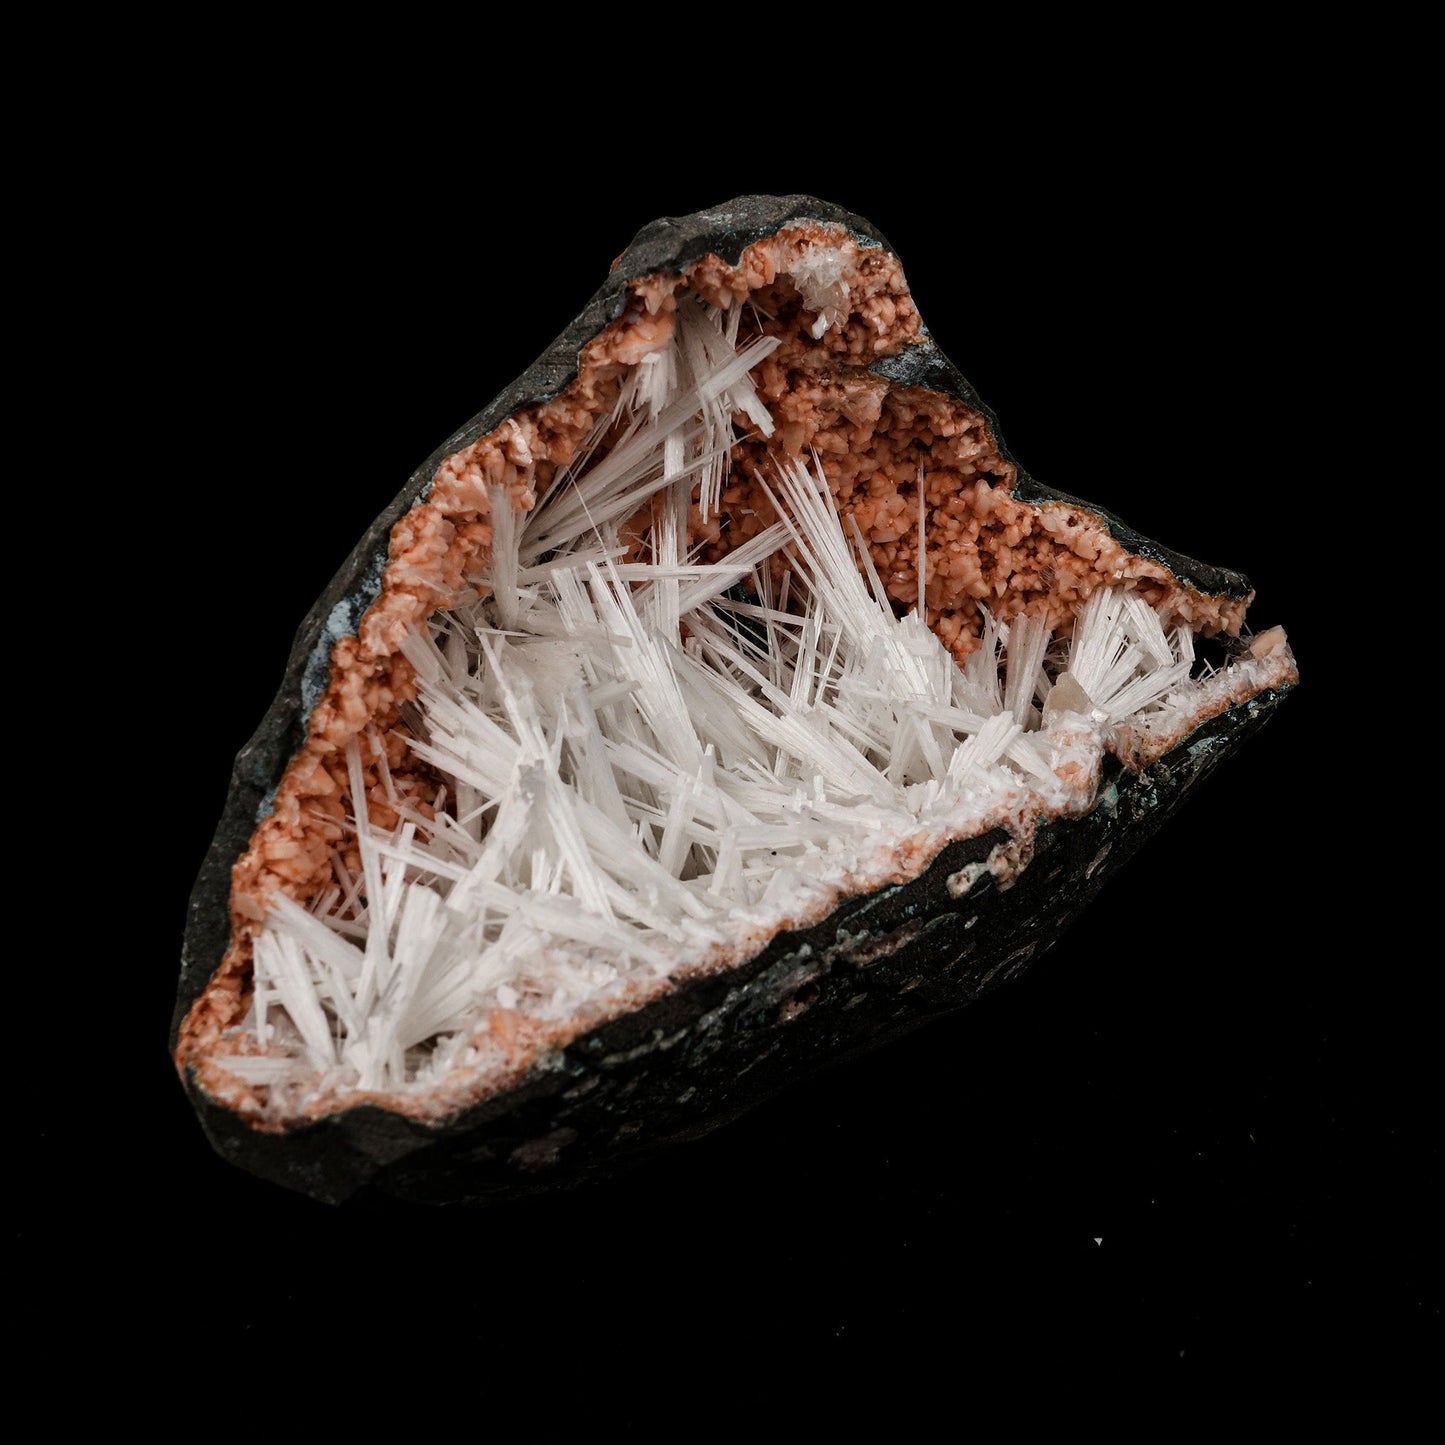 Scolecite Sprays Inside Heulandite Geode Natural Mineral Specimen # B…  https://www.superbminerals.us/products/scolecite-sprays-inside-heulandite-geode-natural-mineral-specimen-b-5286  Features: A huge Geode with beige Heulandite crystals and a conspicuous radial spray of glossy, colourless, extremely transparent, acicular (needle-like) Scolecite crystals throughout, as well as numerous solitary Scolecite crystals. Simply breathtaking - the crystal structure, lustre, contrast, and symmetry are all 